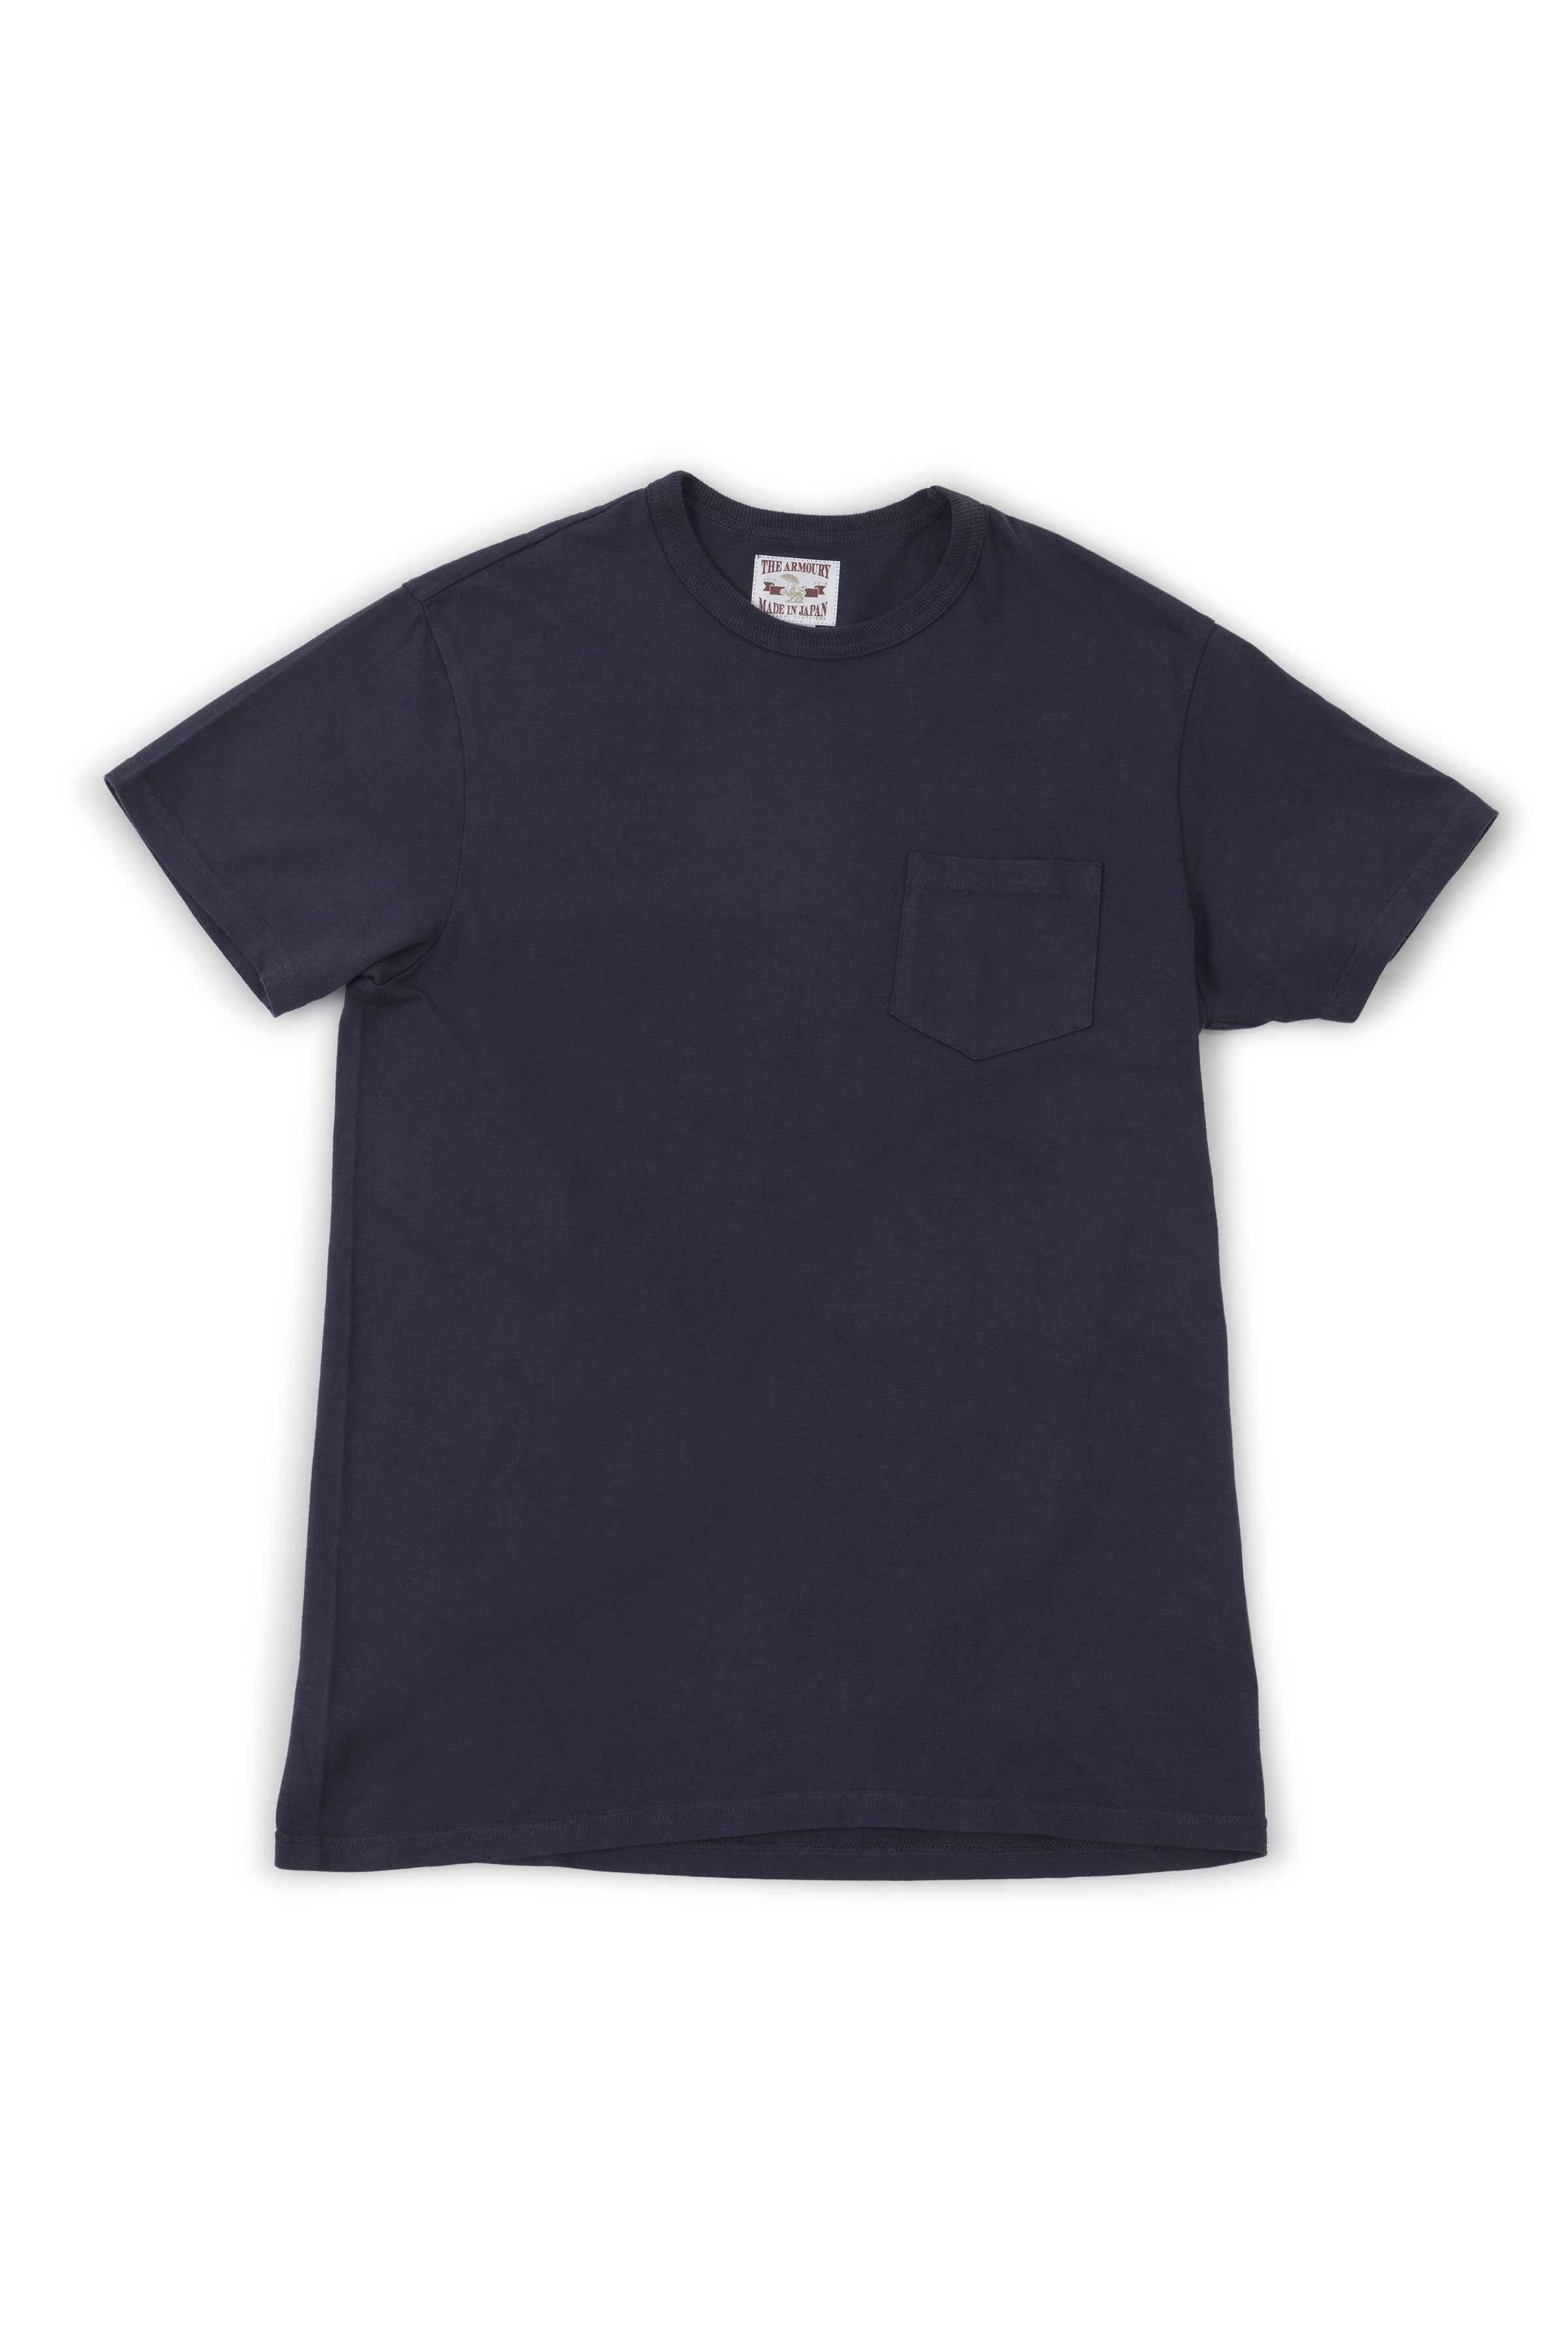 The Armoury by The Real McCoy's Navy Cotton Pocket Tee